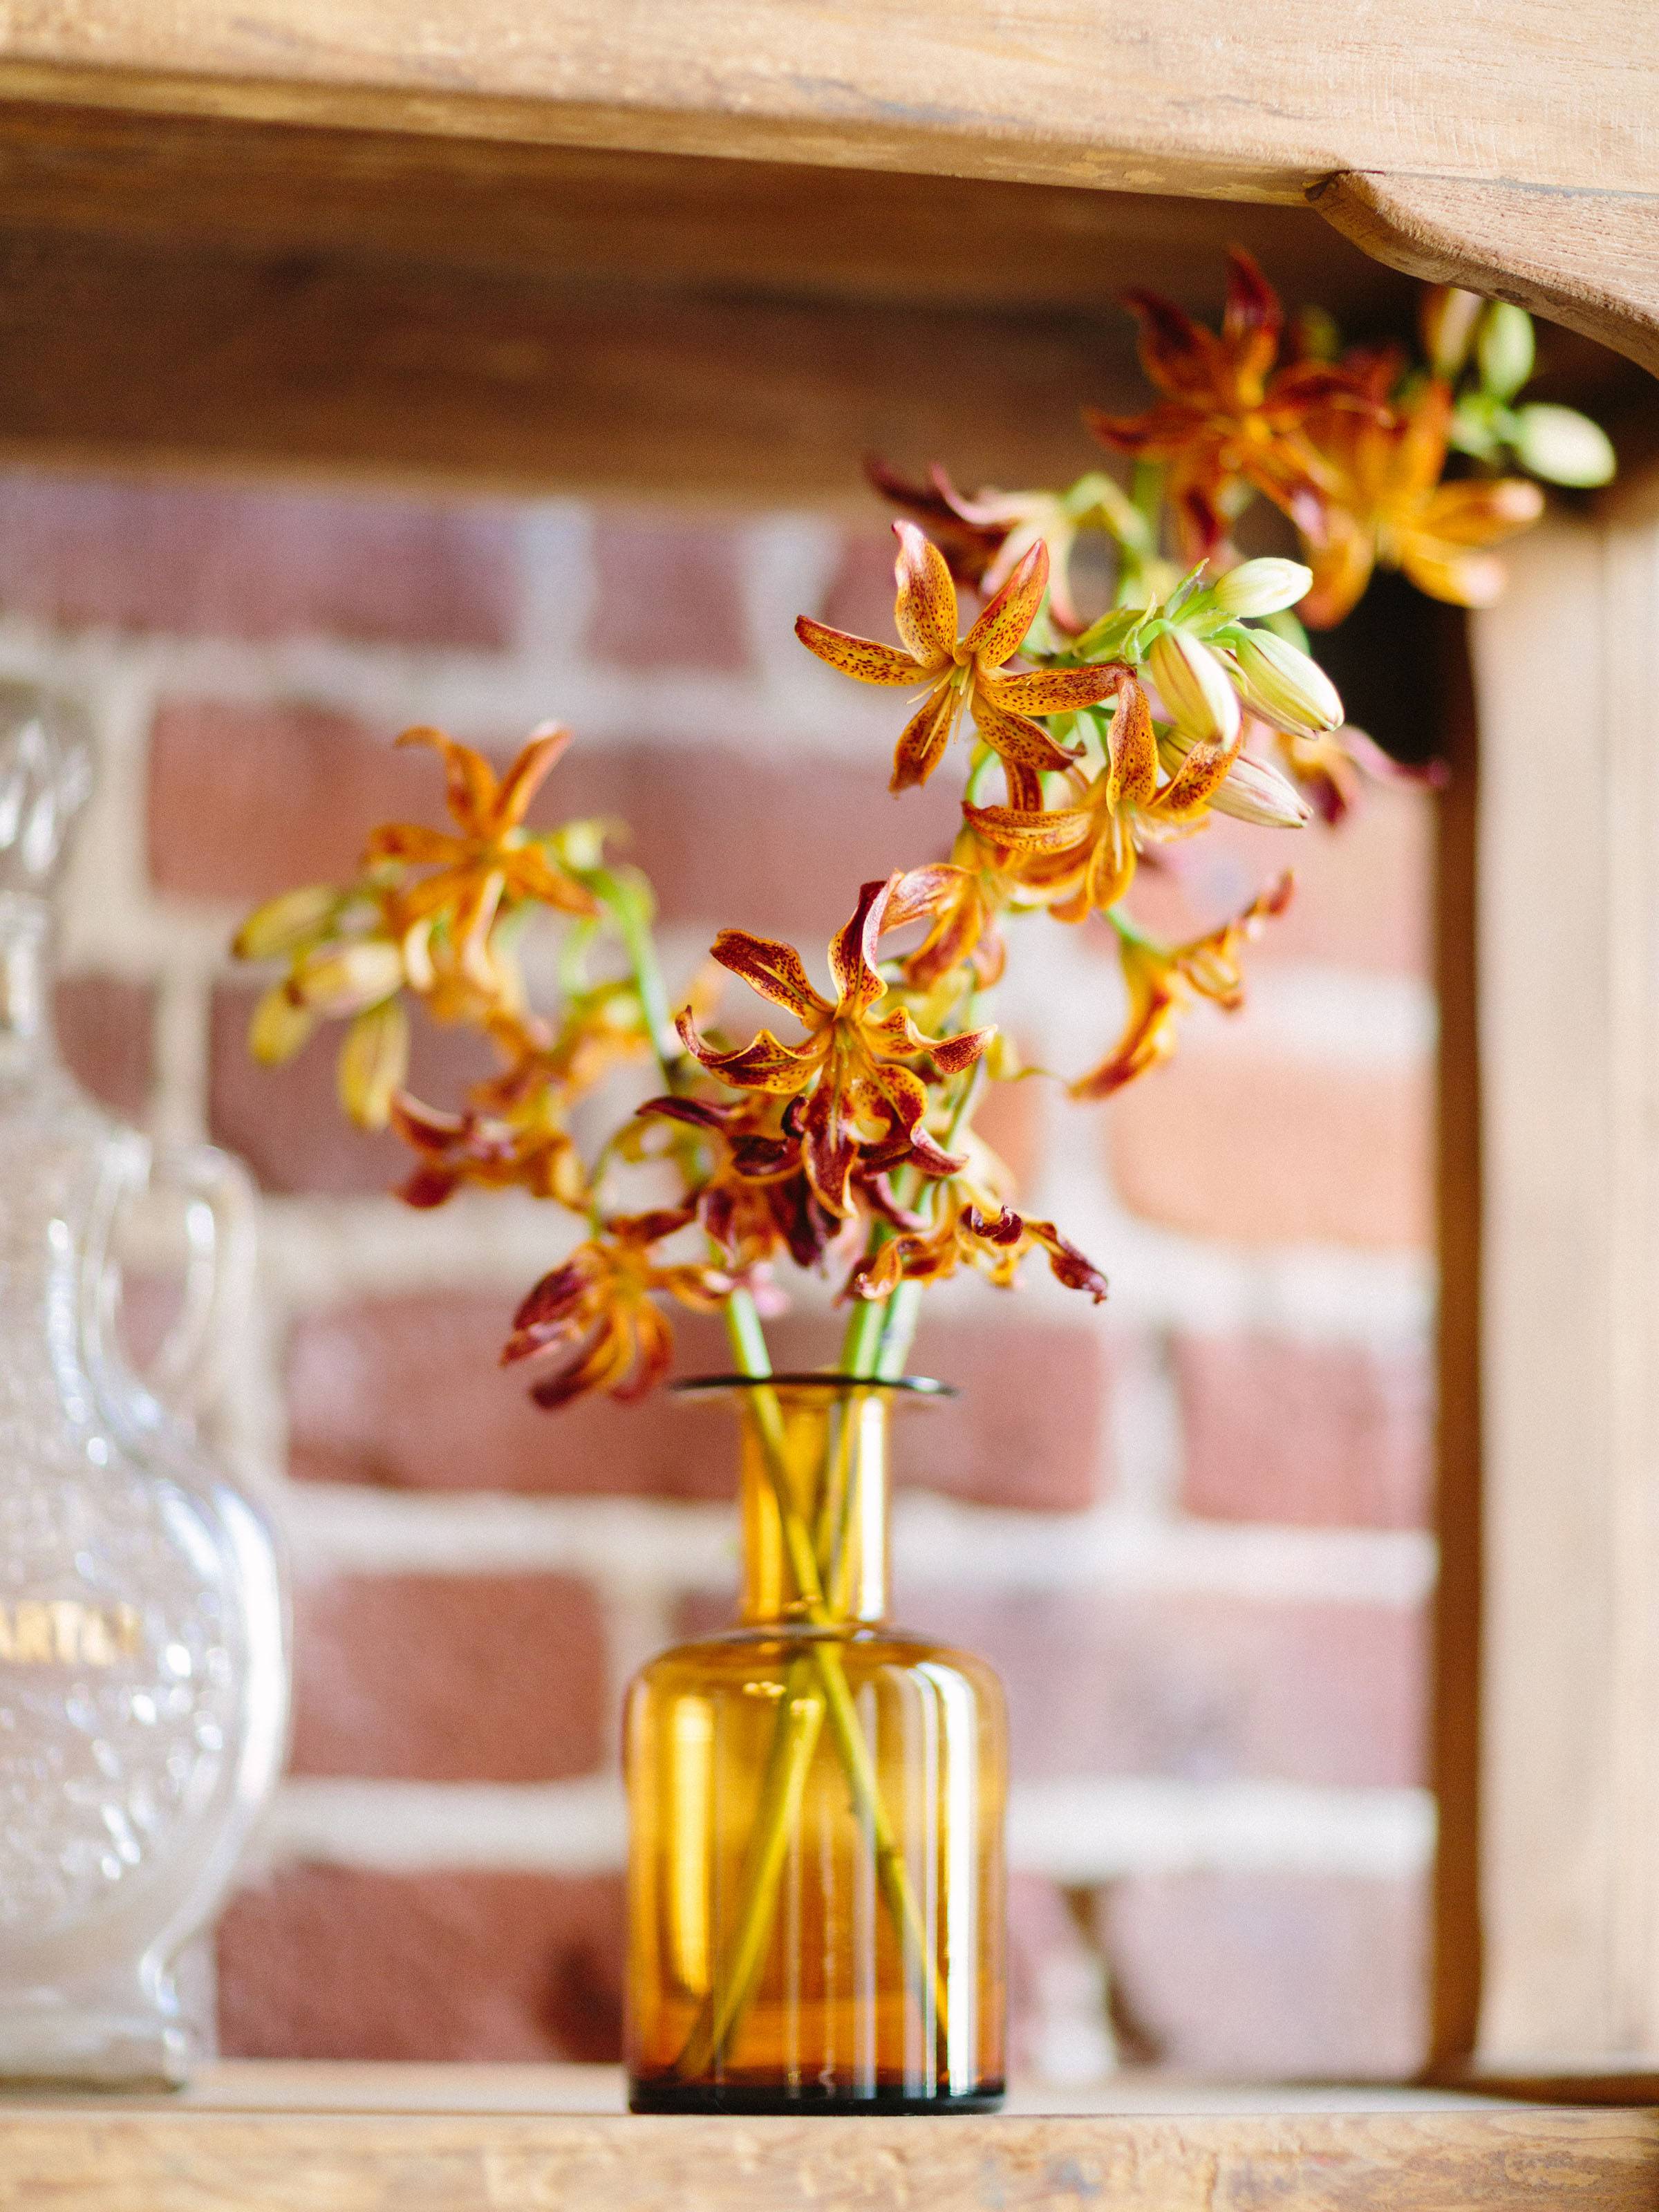 Yellow retro glass vase with yellow and red orchid stems